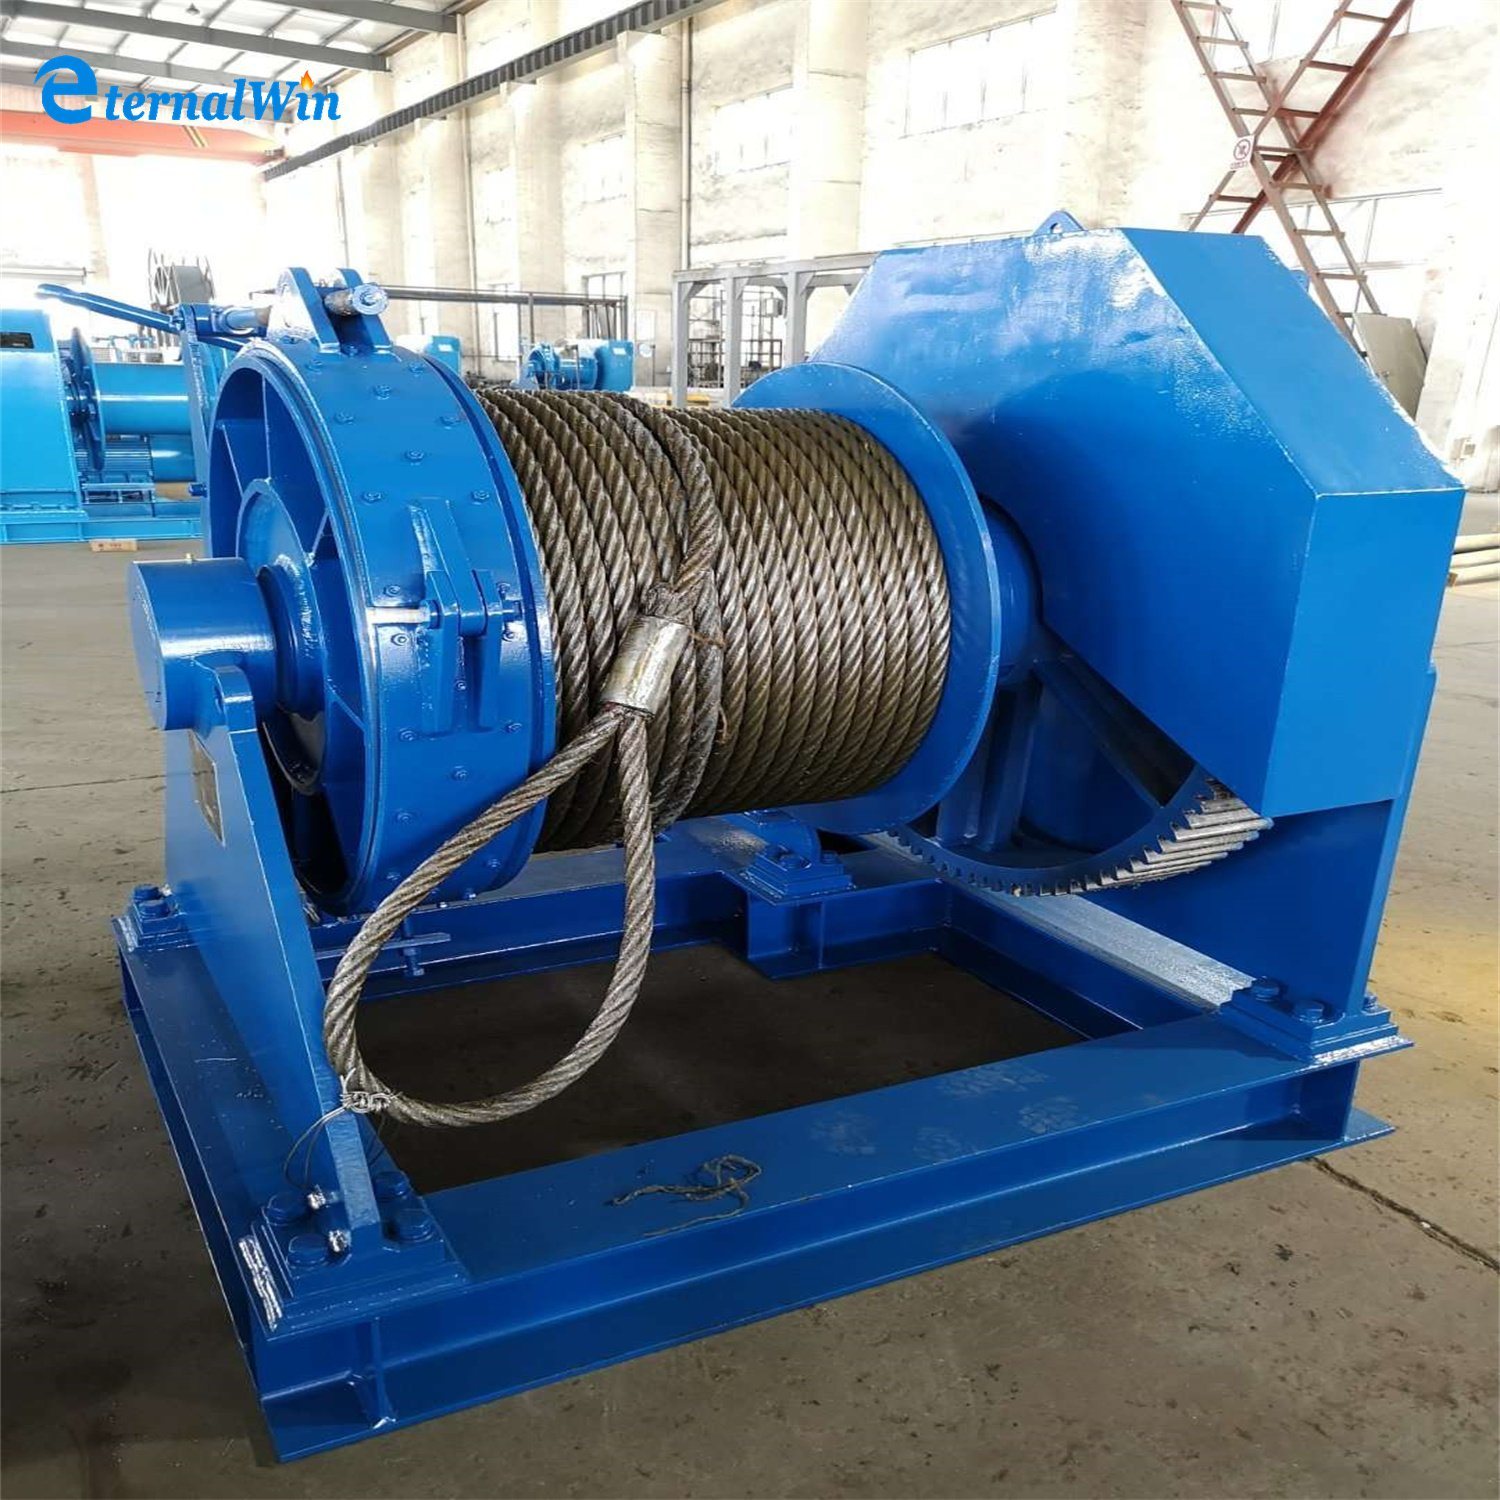 35000 Lbs Winch with Wire Rope for Deck Crane